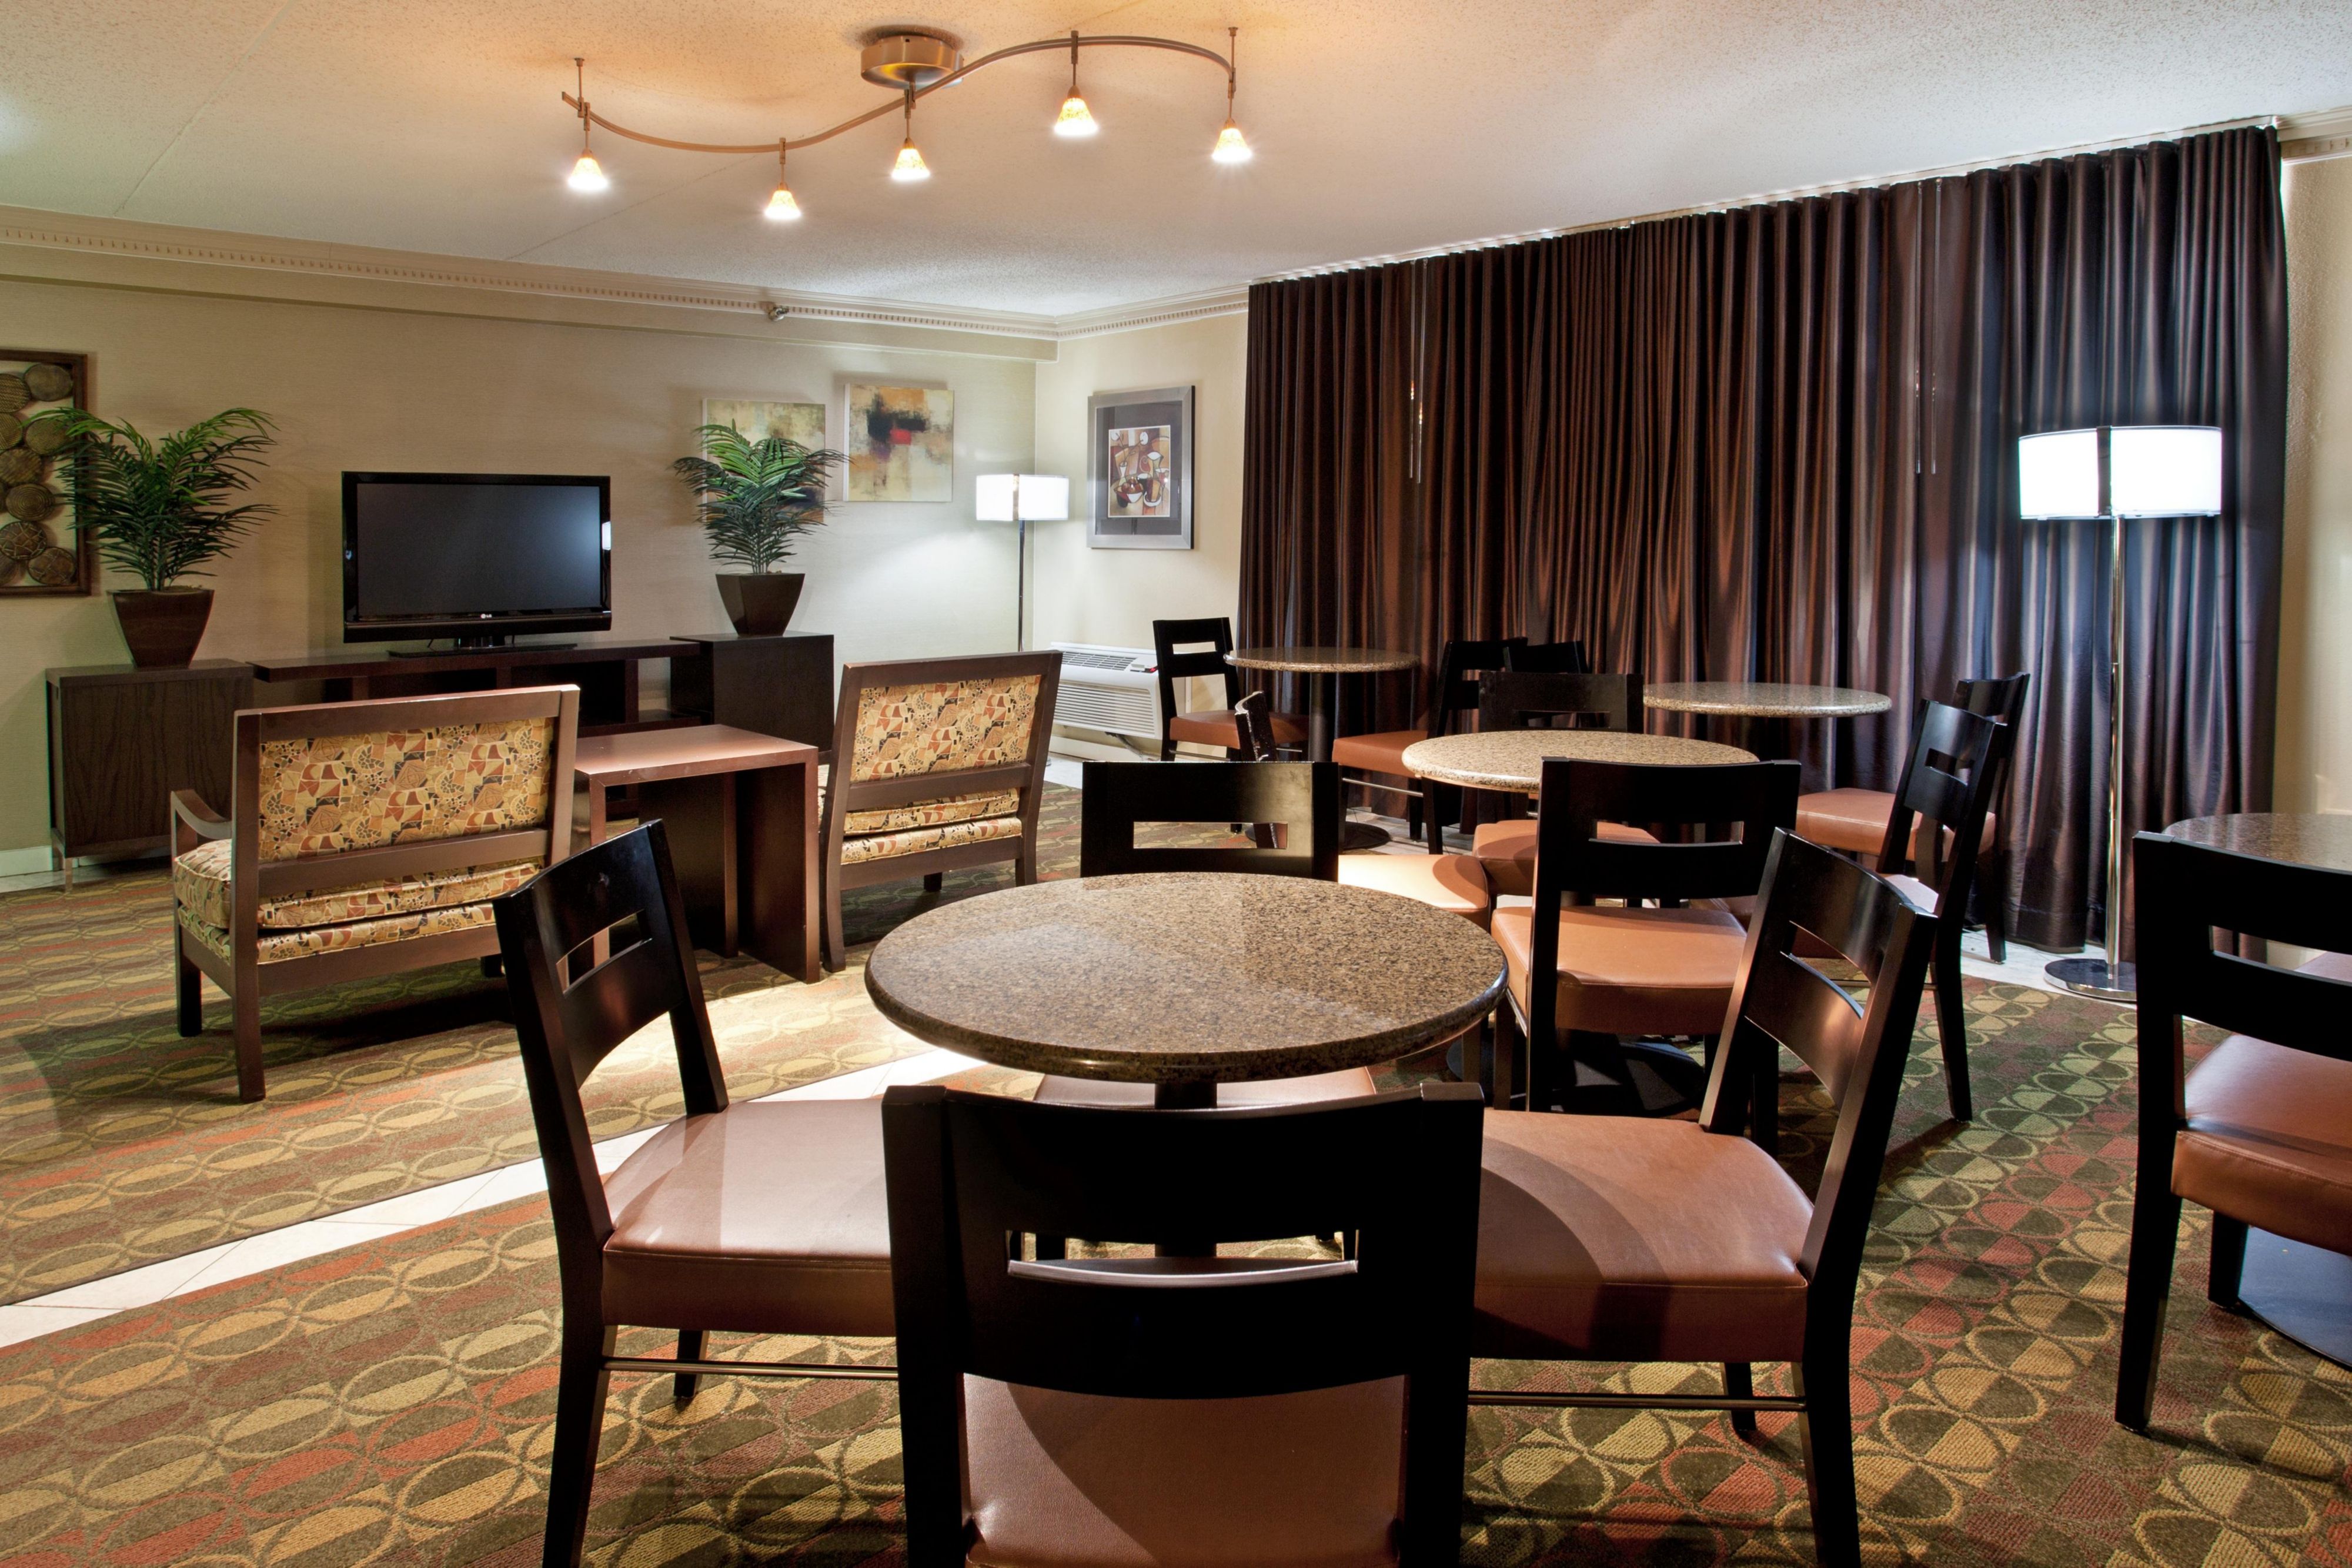 Executive Level guests can enjoy the Concierge Lounge